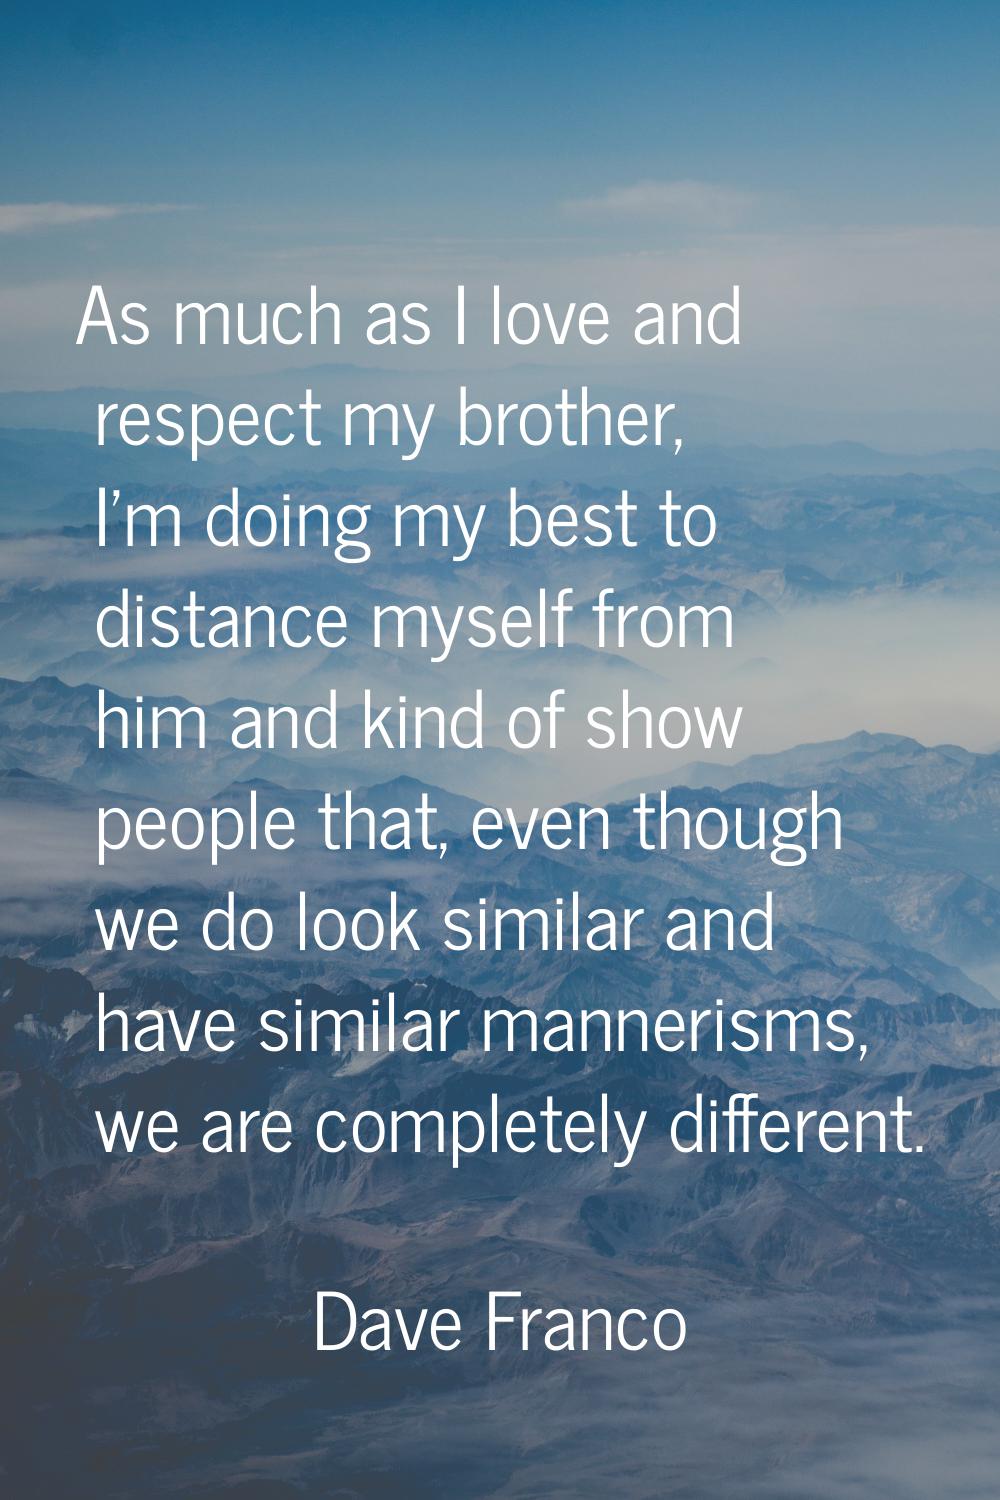 As much as I love and respect my brother, I'm doing my best to distance myself from him and kind of